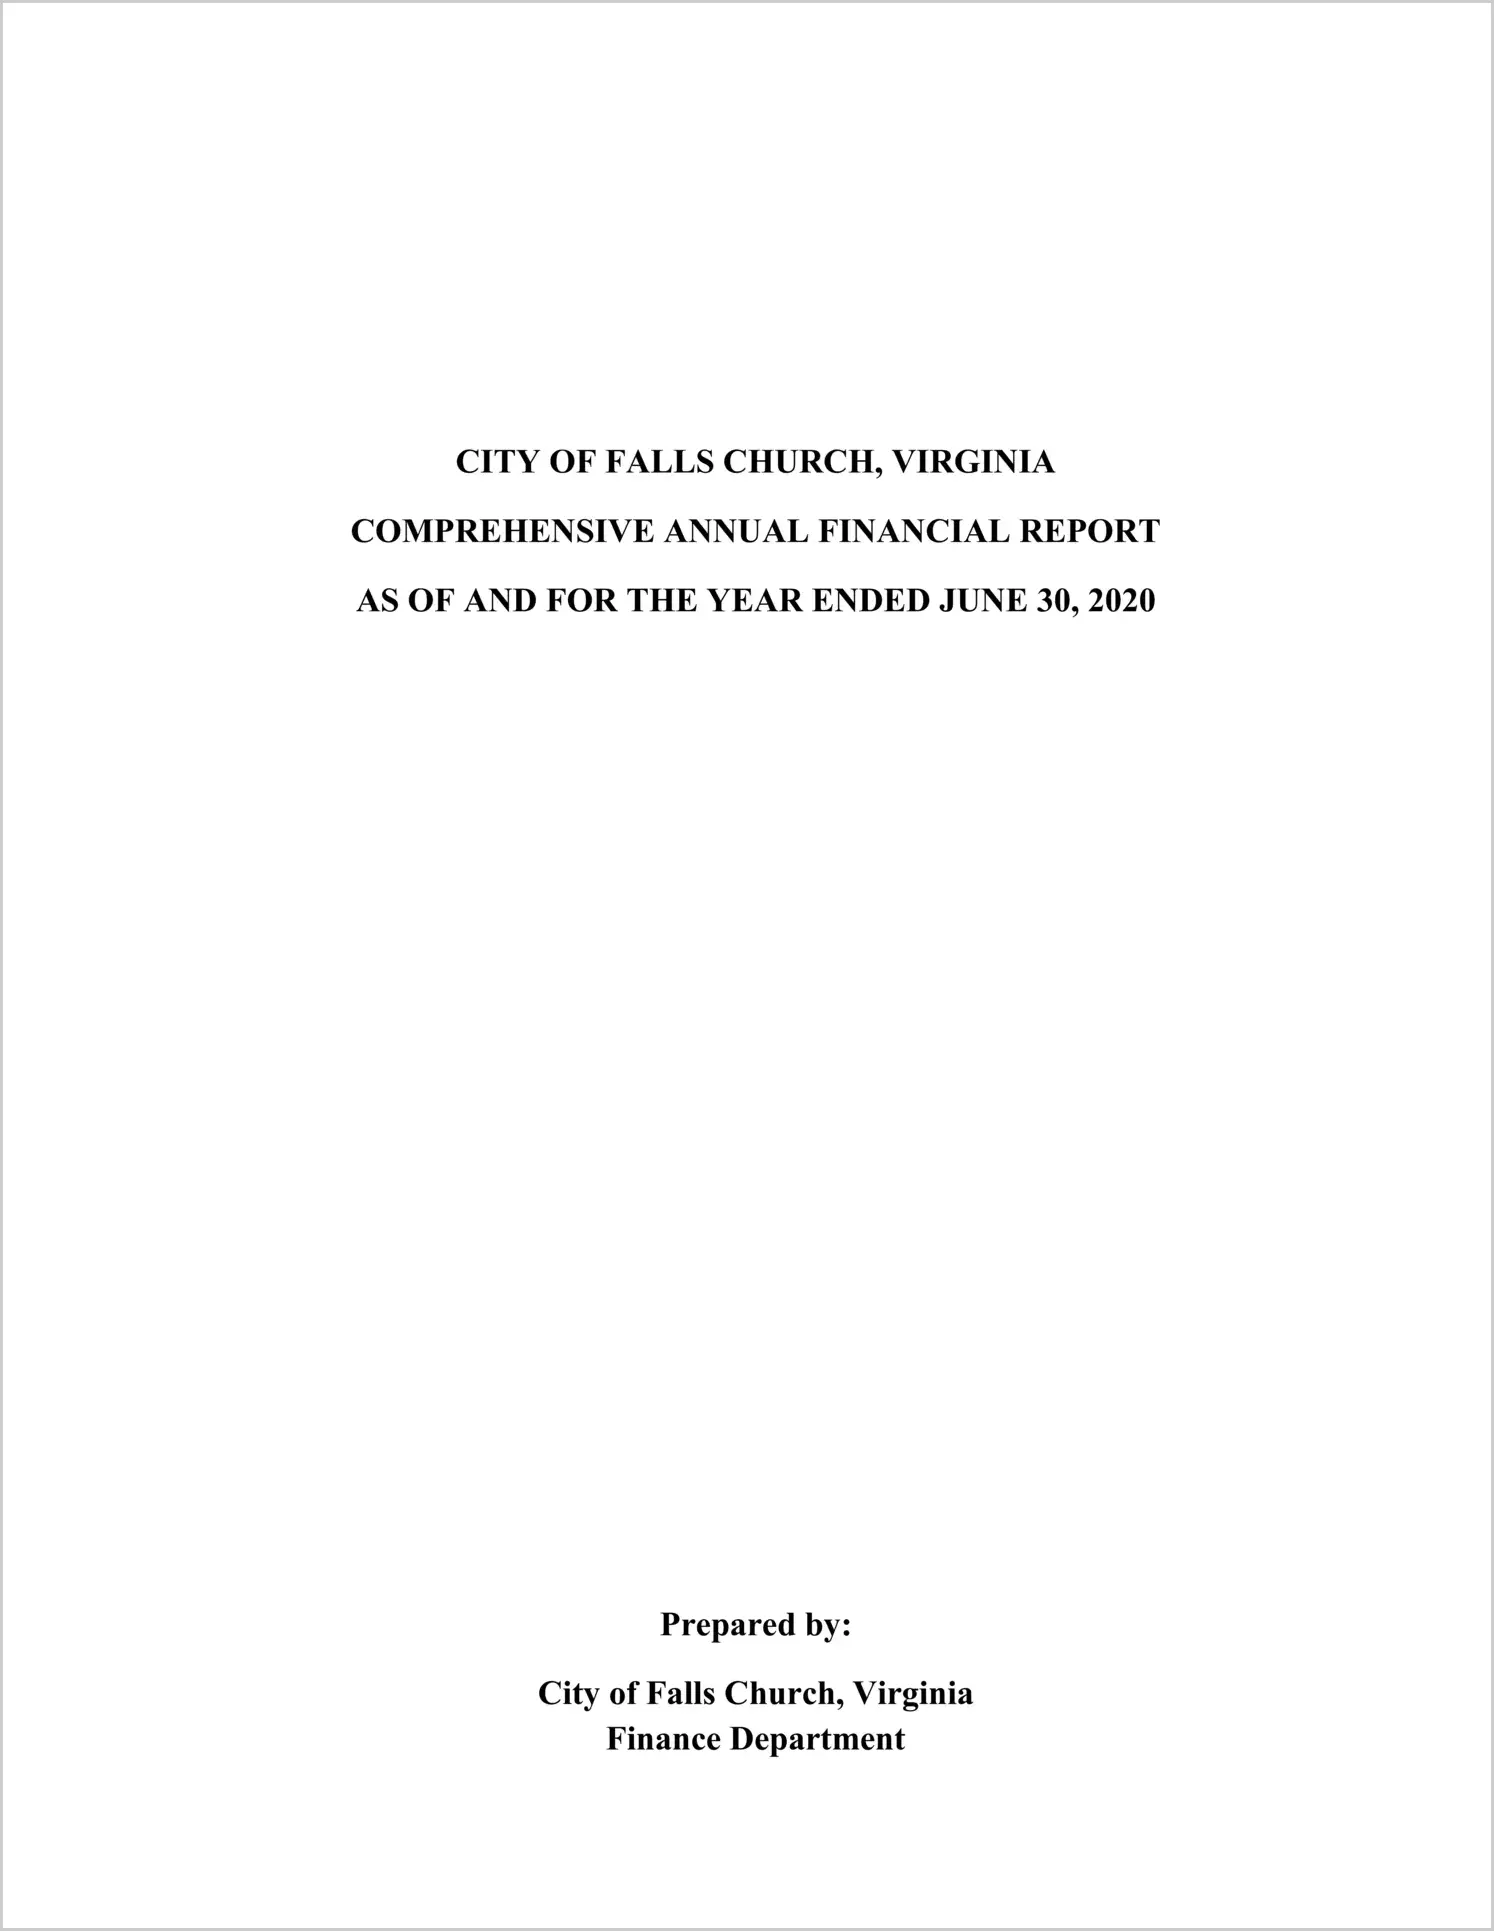 2020 Annual Financial Report for City of Falls Church